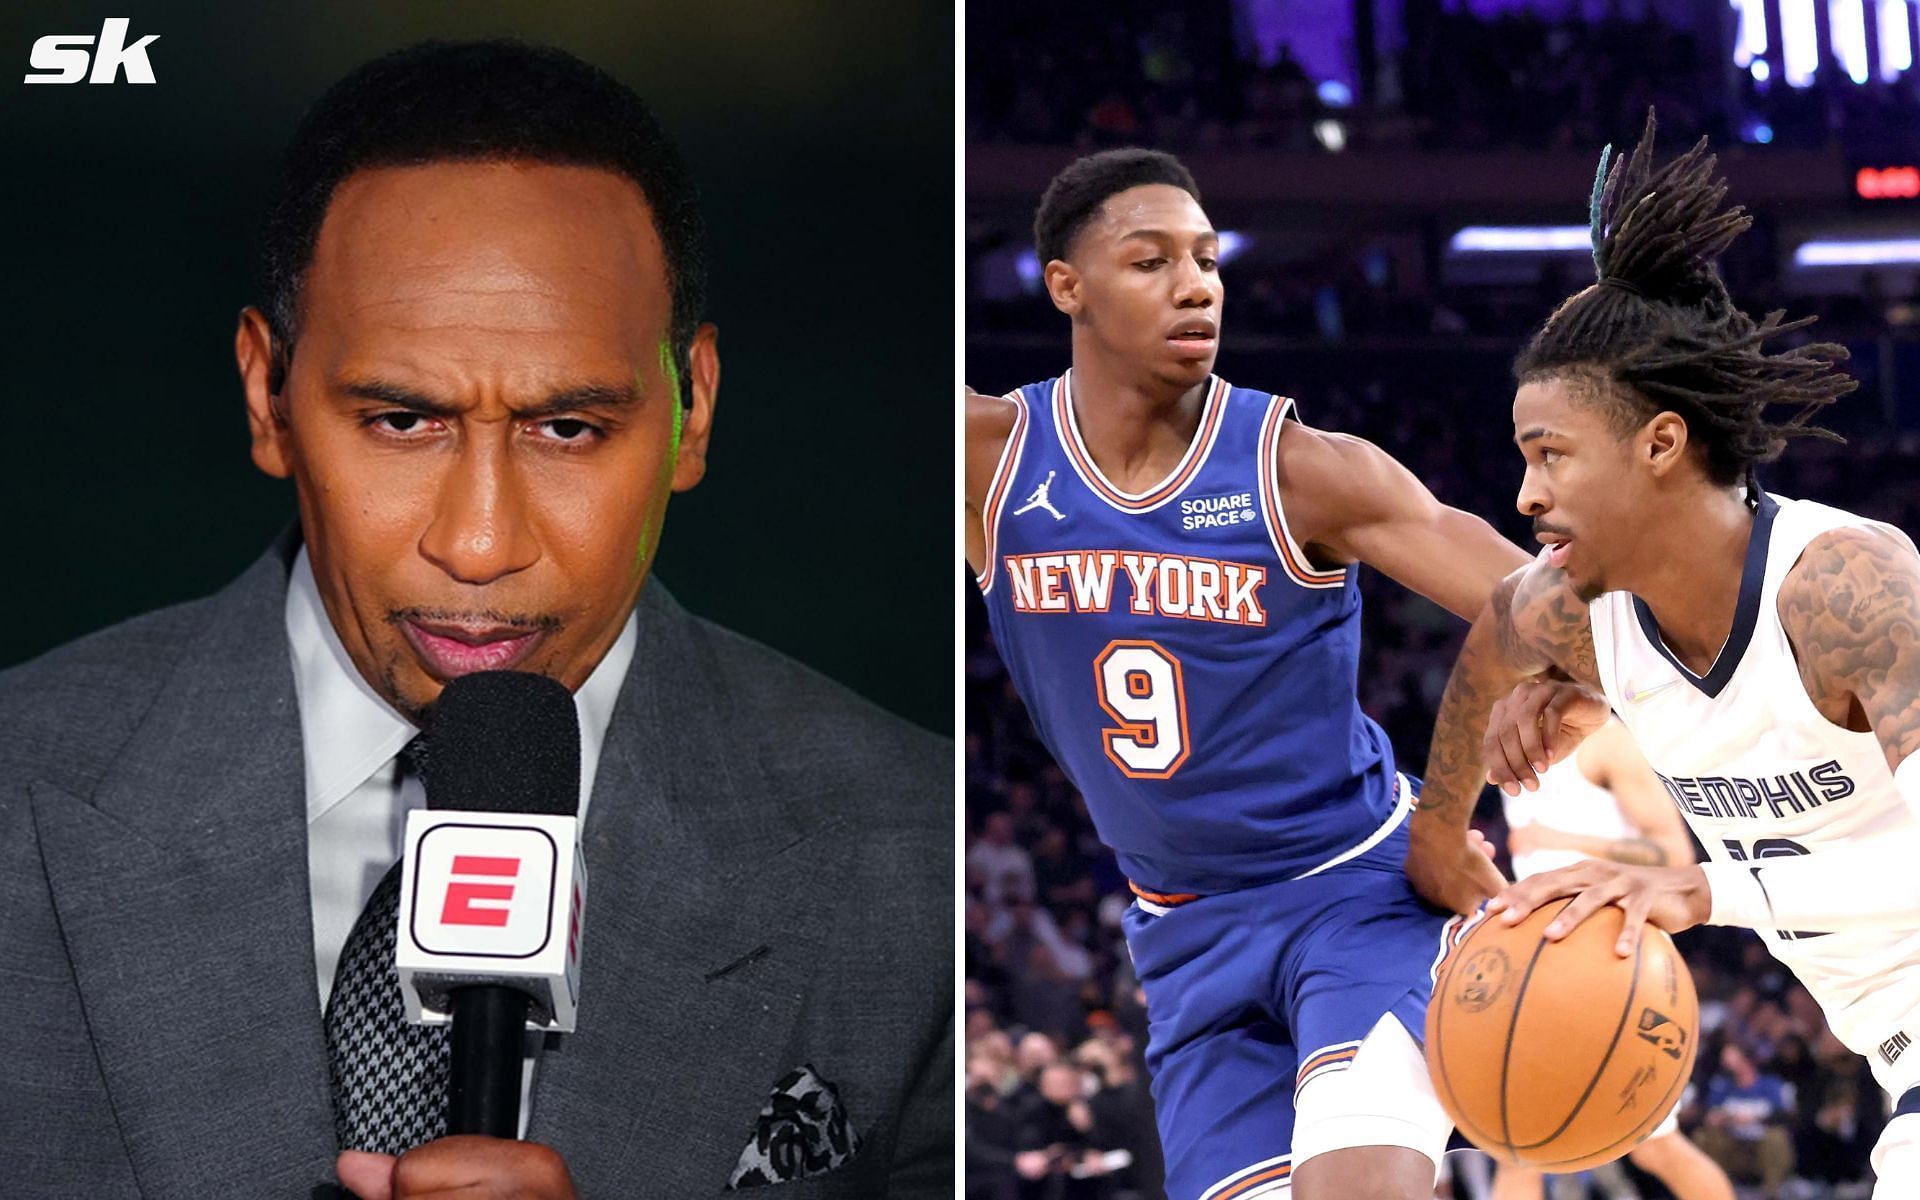 RJ Barrett might end up being the best pick”: Stephen A